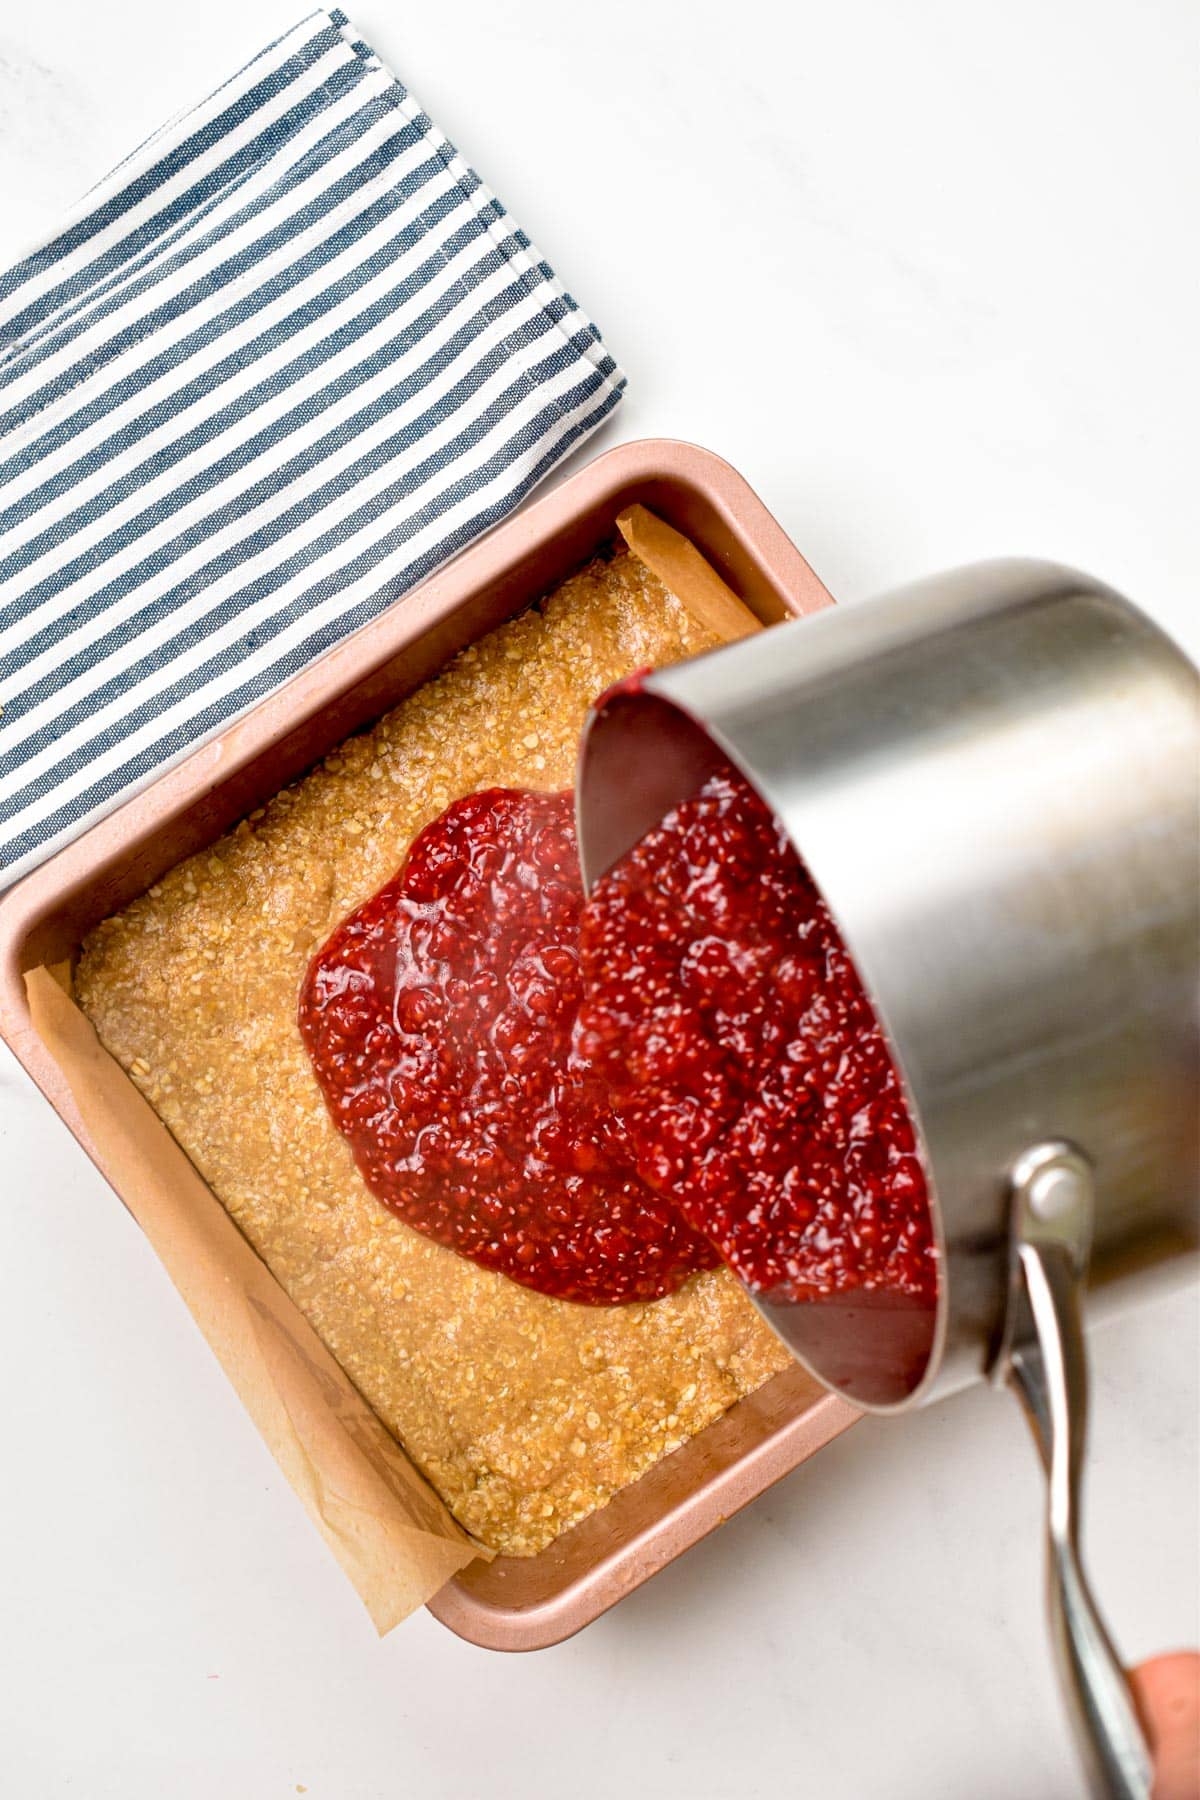 A saucepan pouring hot raspberry jam on top of the oatmeal bar mixture (unbaked).